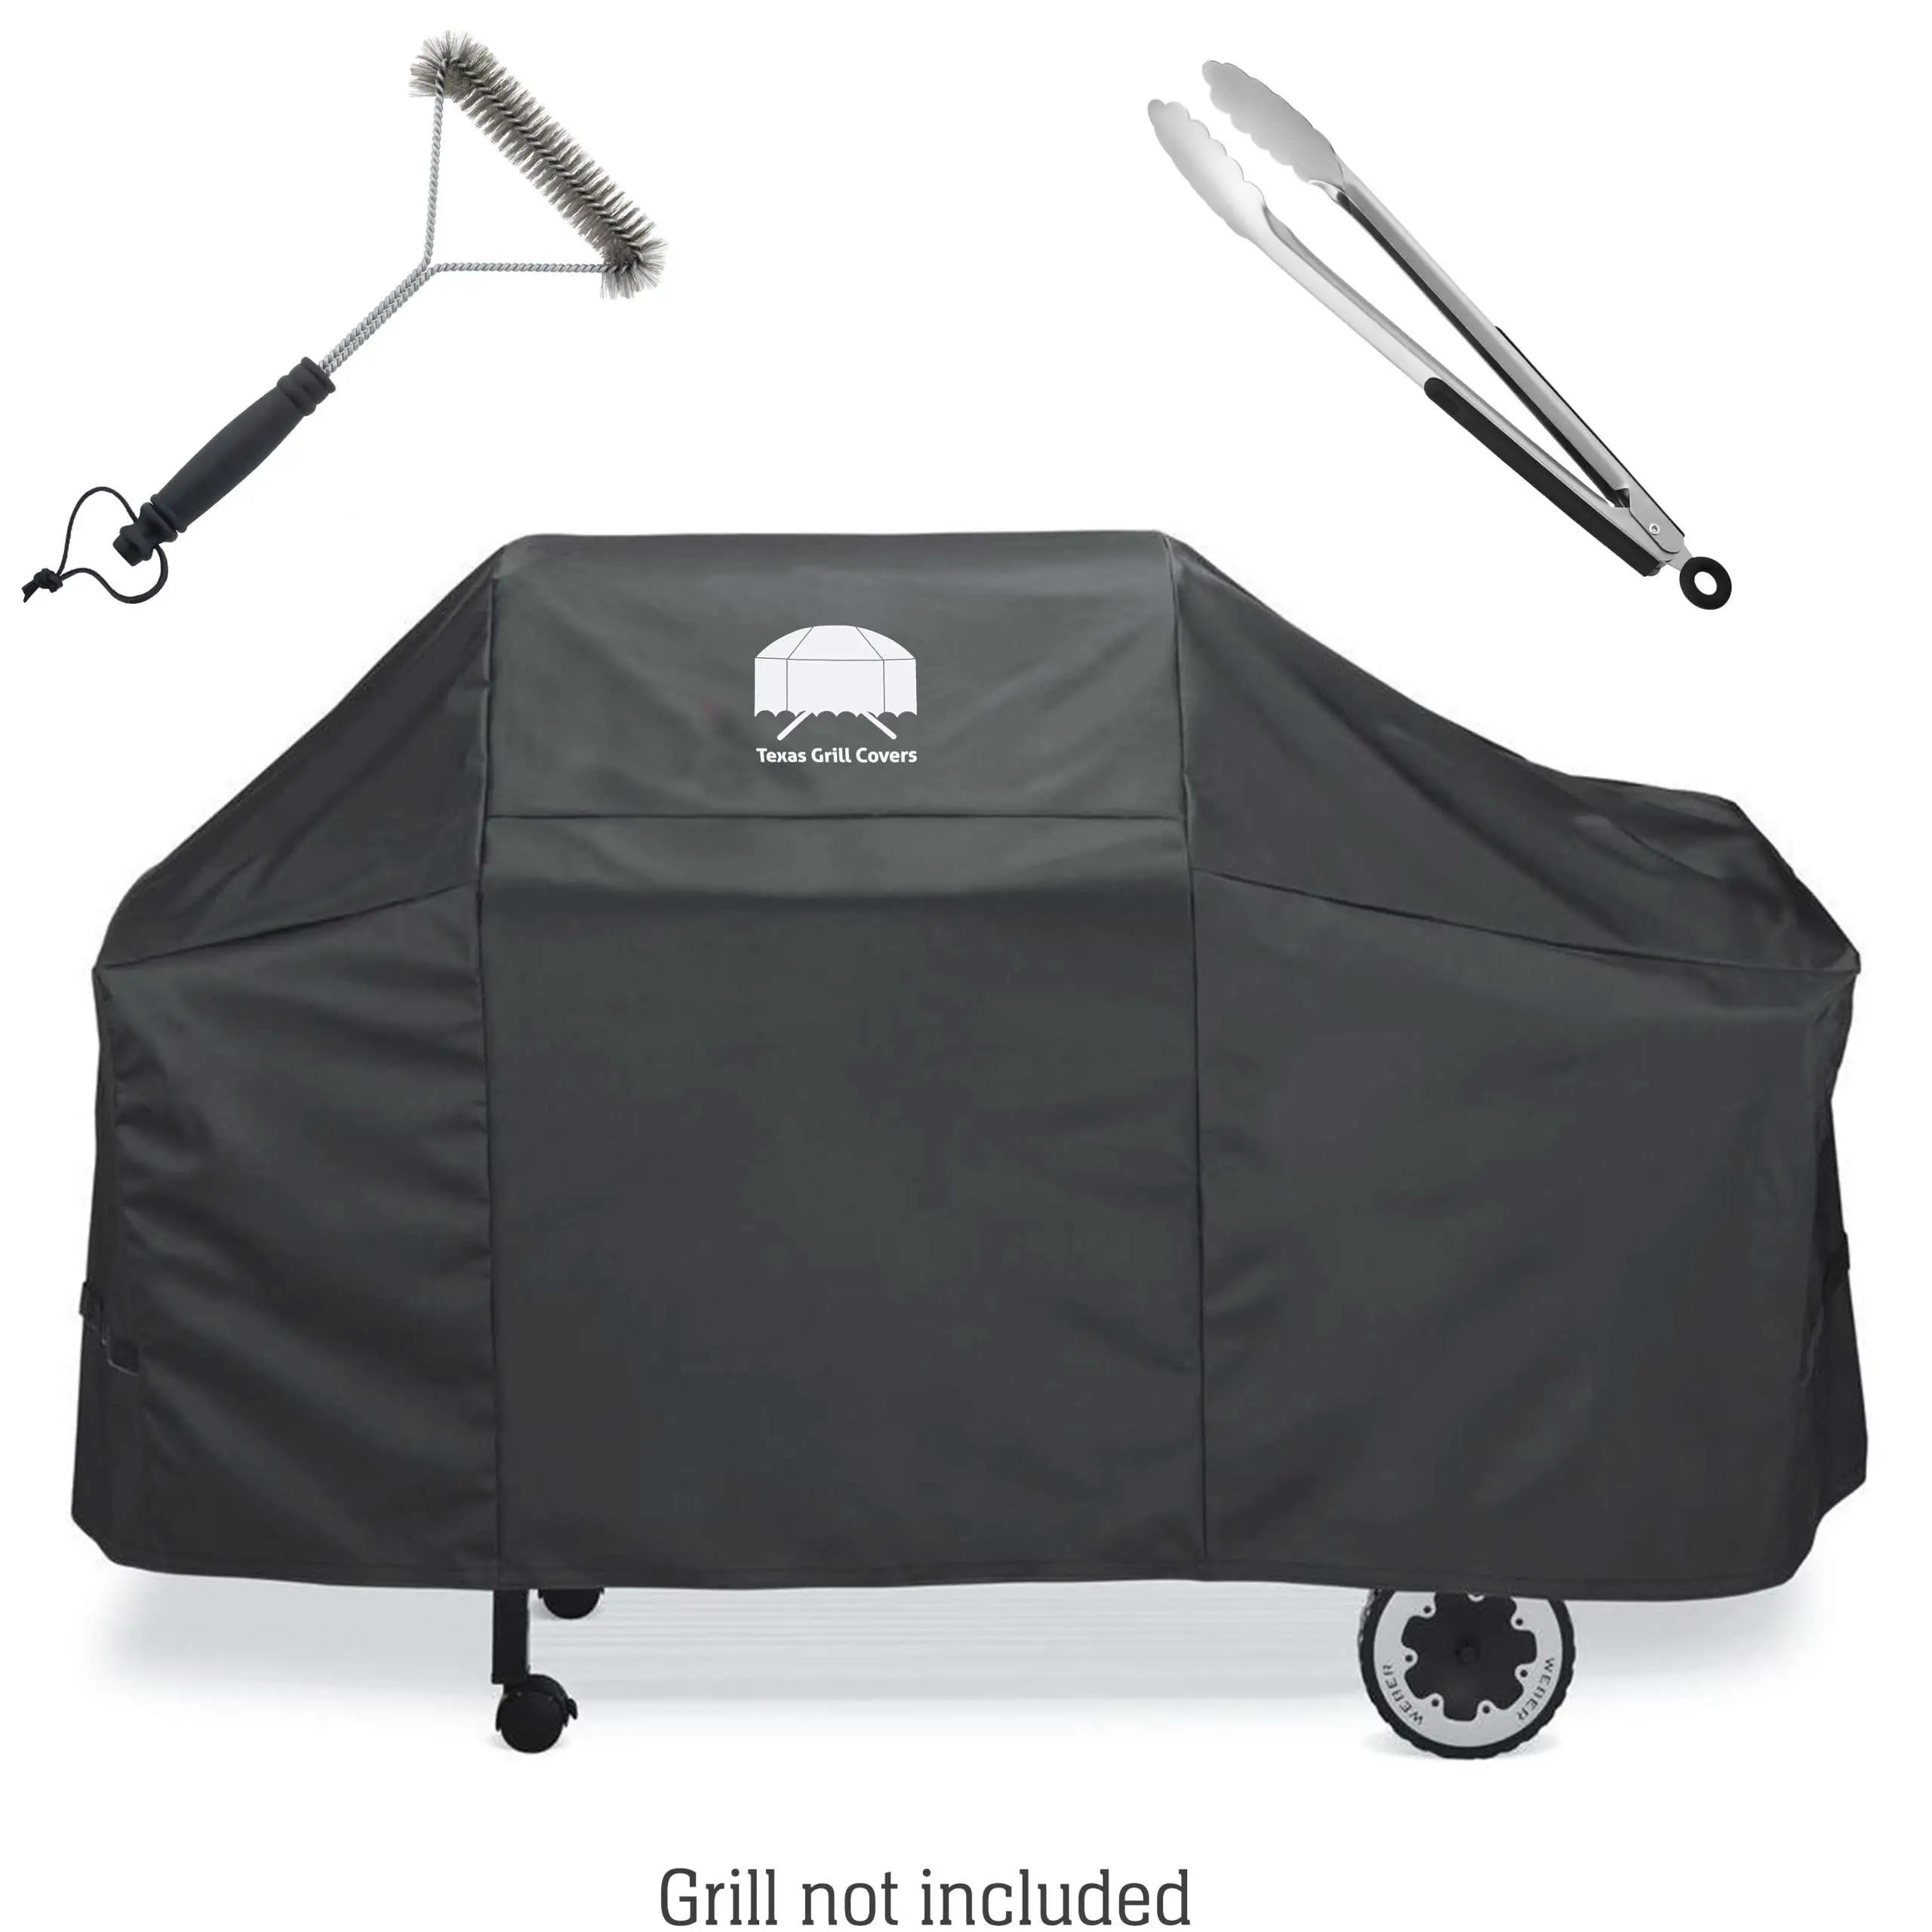 Texas Grill Covers 7552 Premium Cover for Weber Genesis Silver / Gold ...